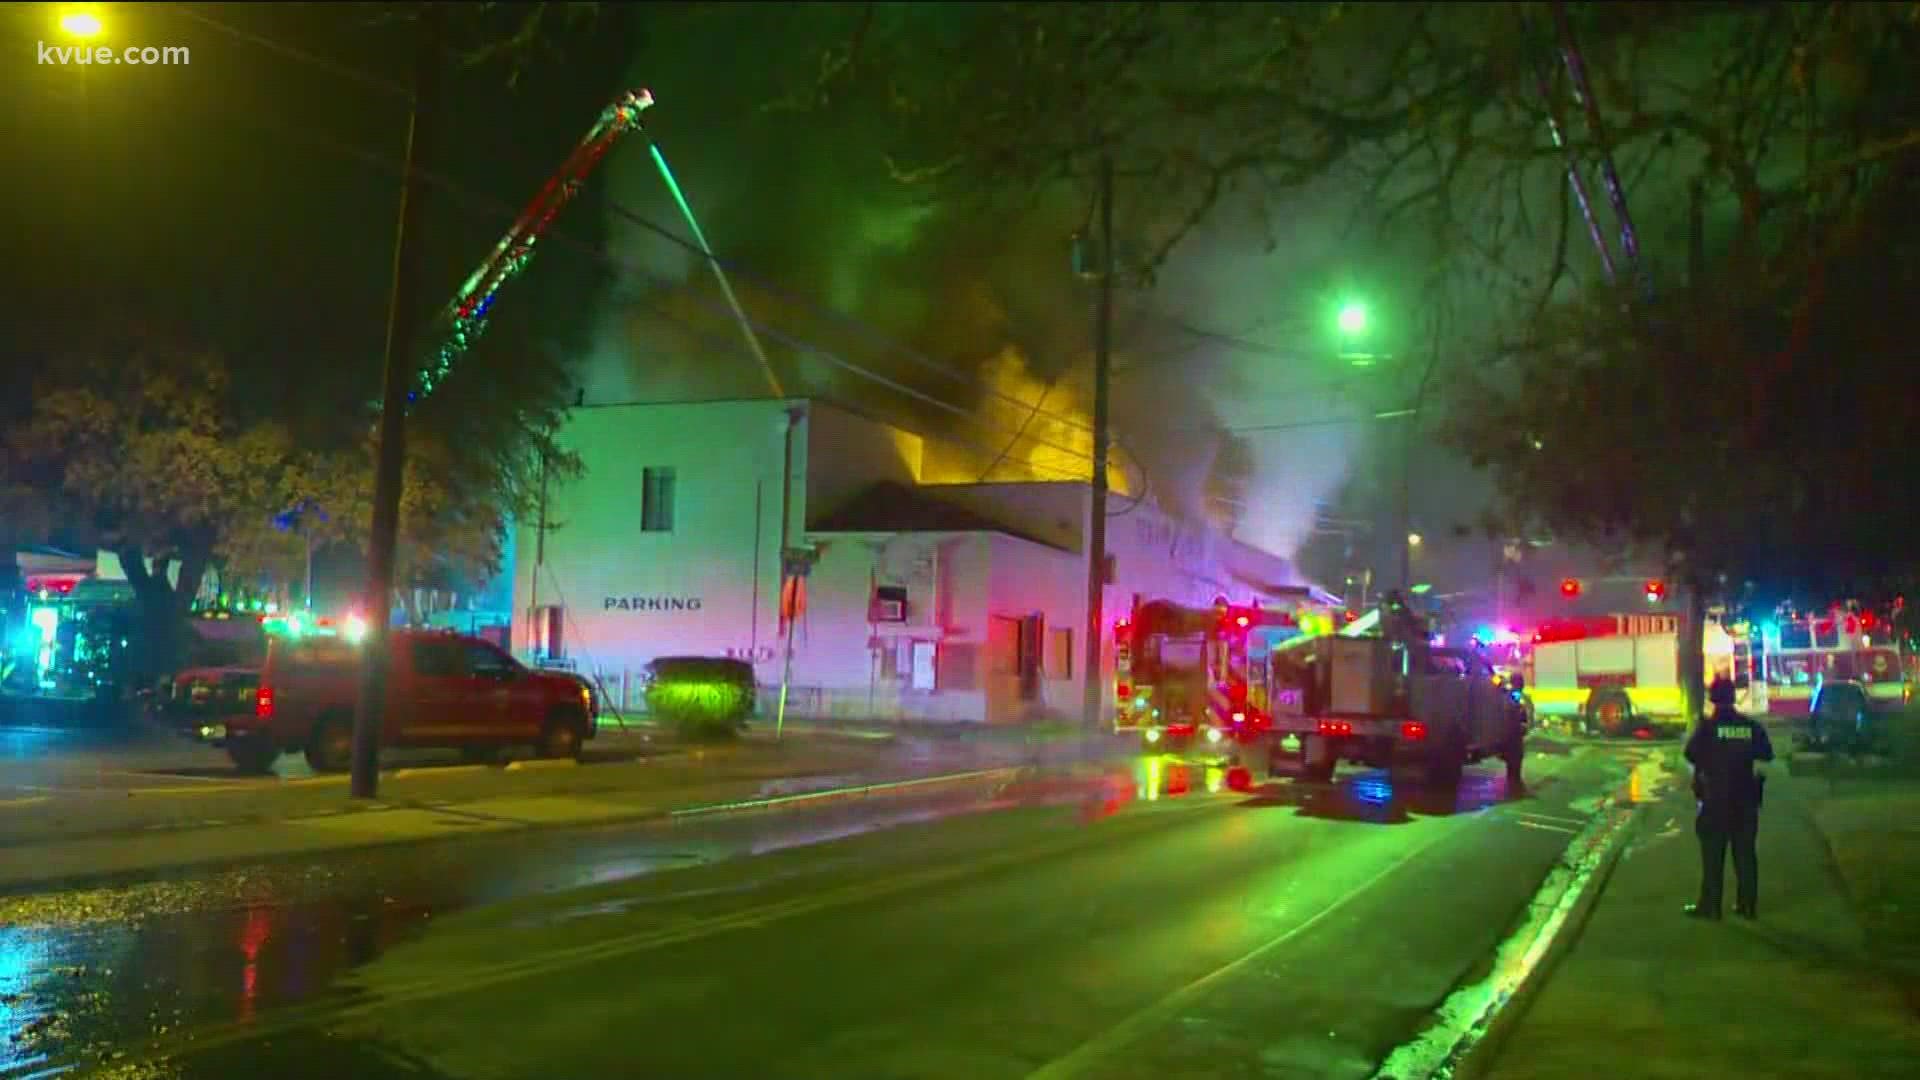 No one was injured in the fire, but crews say the building is a total loss.